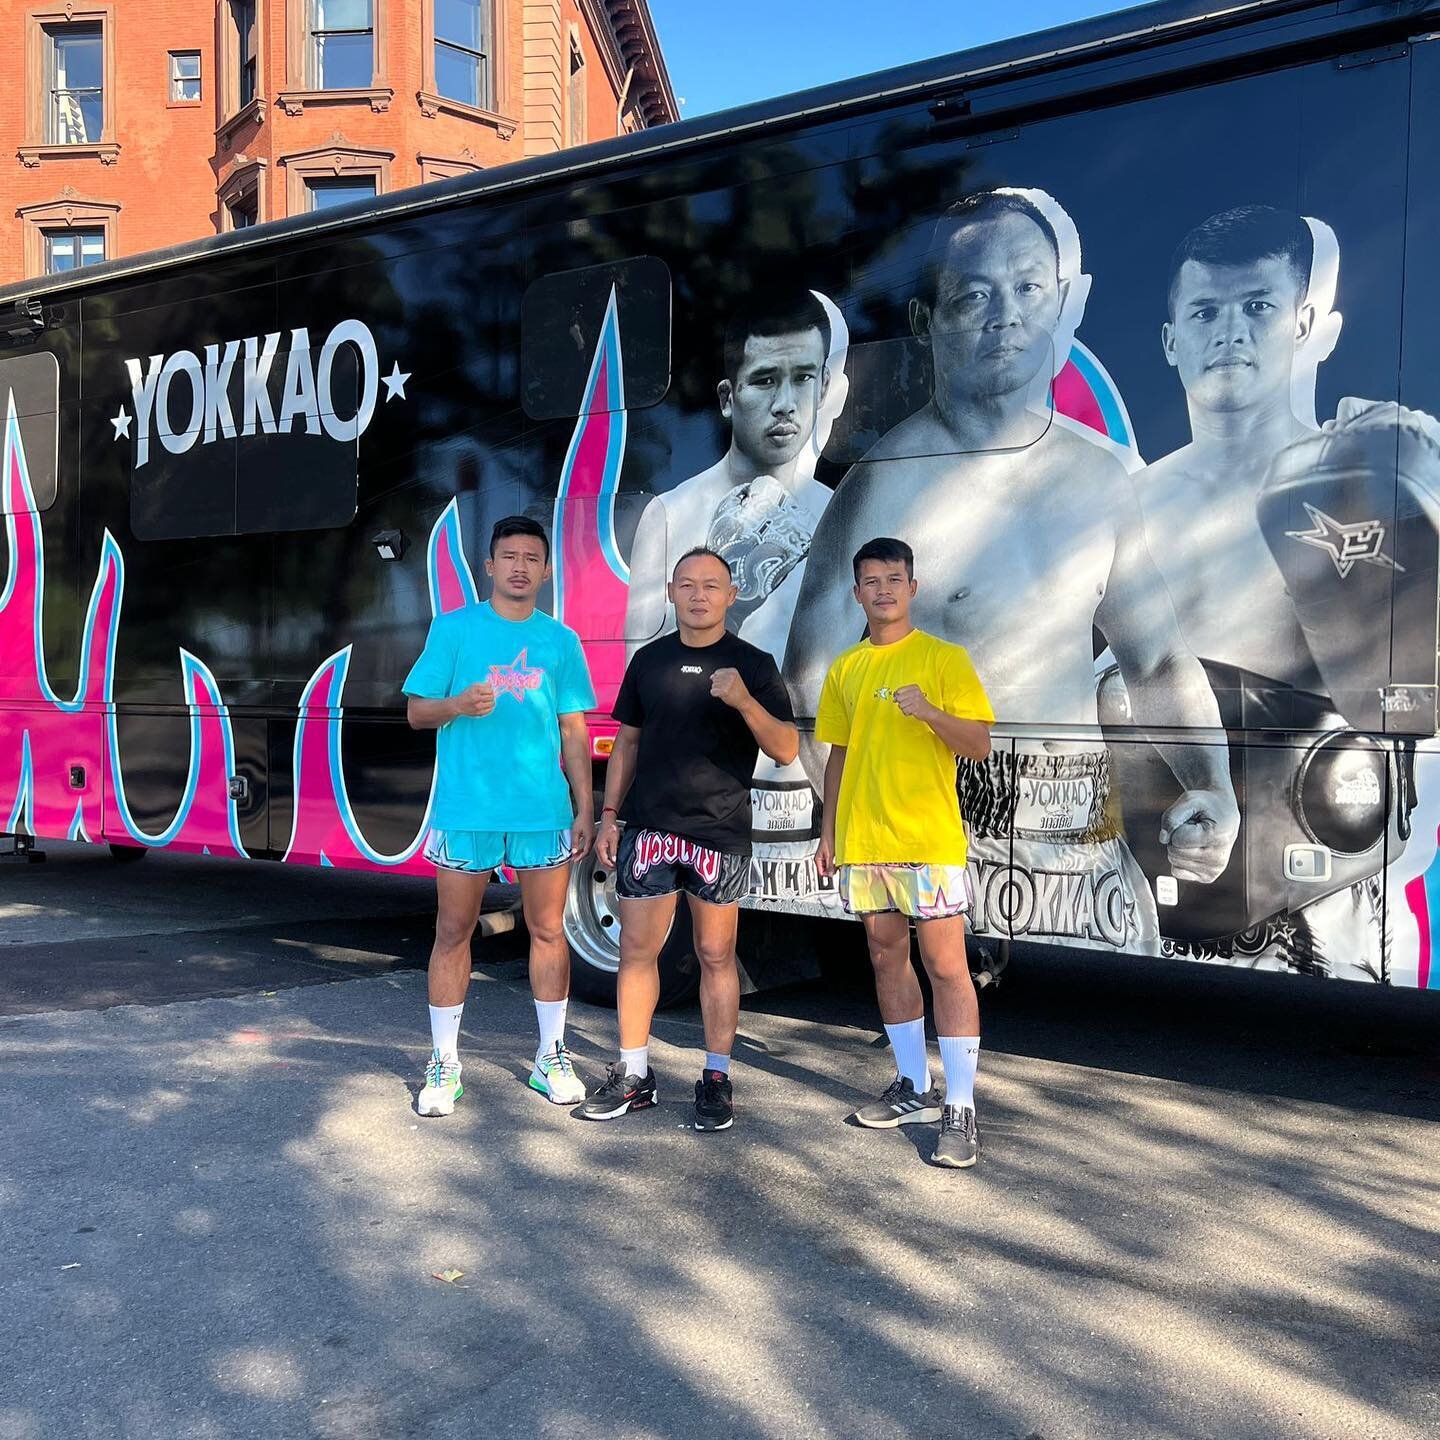 WE. ARE. BACK! The YOKKAO USA Tour 2022 has arrived! 30 seminars in 27 days with two of the best Muay Thai fighters in the World  @saenchaithailand  @superlek789 🔥 COAST to COAST 🇺🇸🇹🇭 Buckle up 🚀
.
#yokkao #muaythai #yokkaofightteam